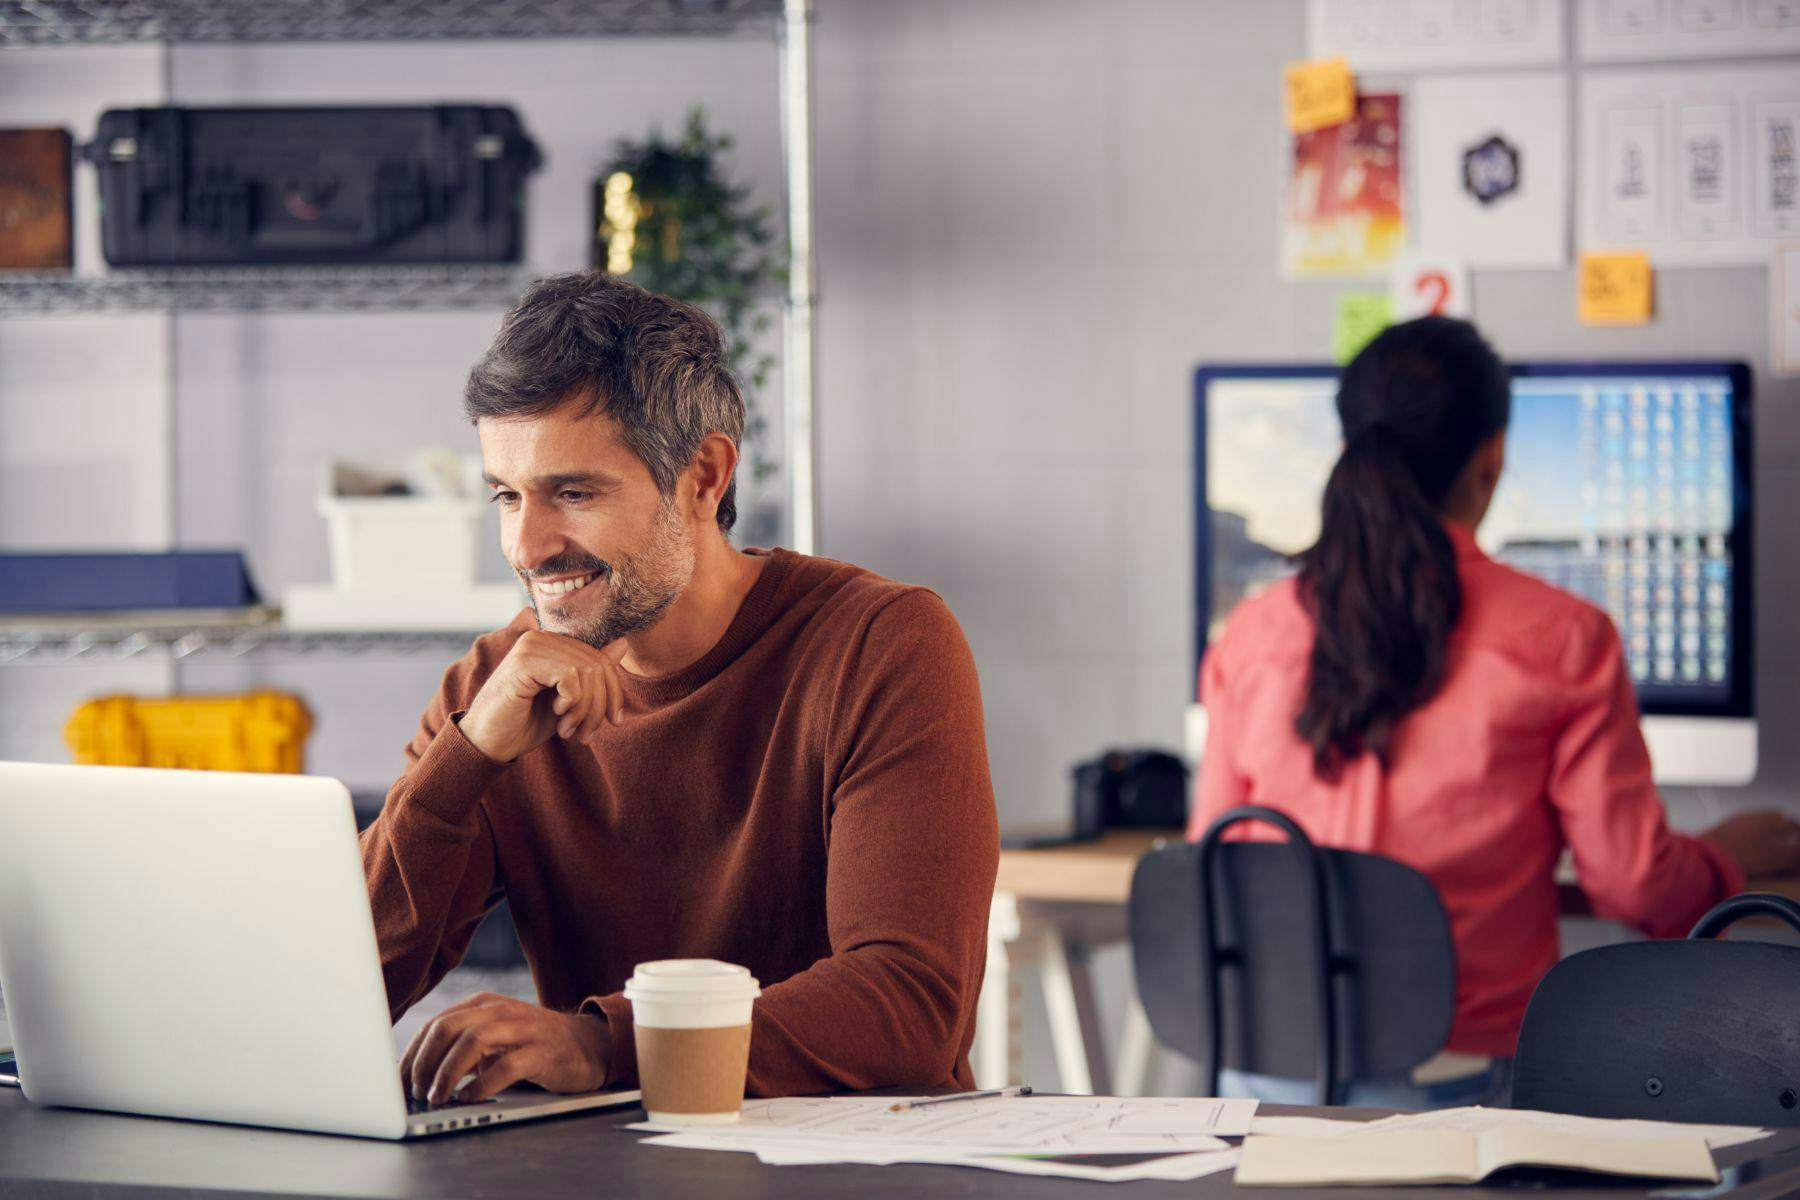 man sitting at a desk looking at computer smiling with woman in background working